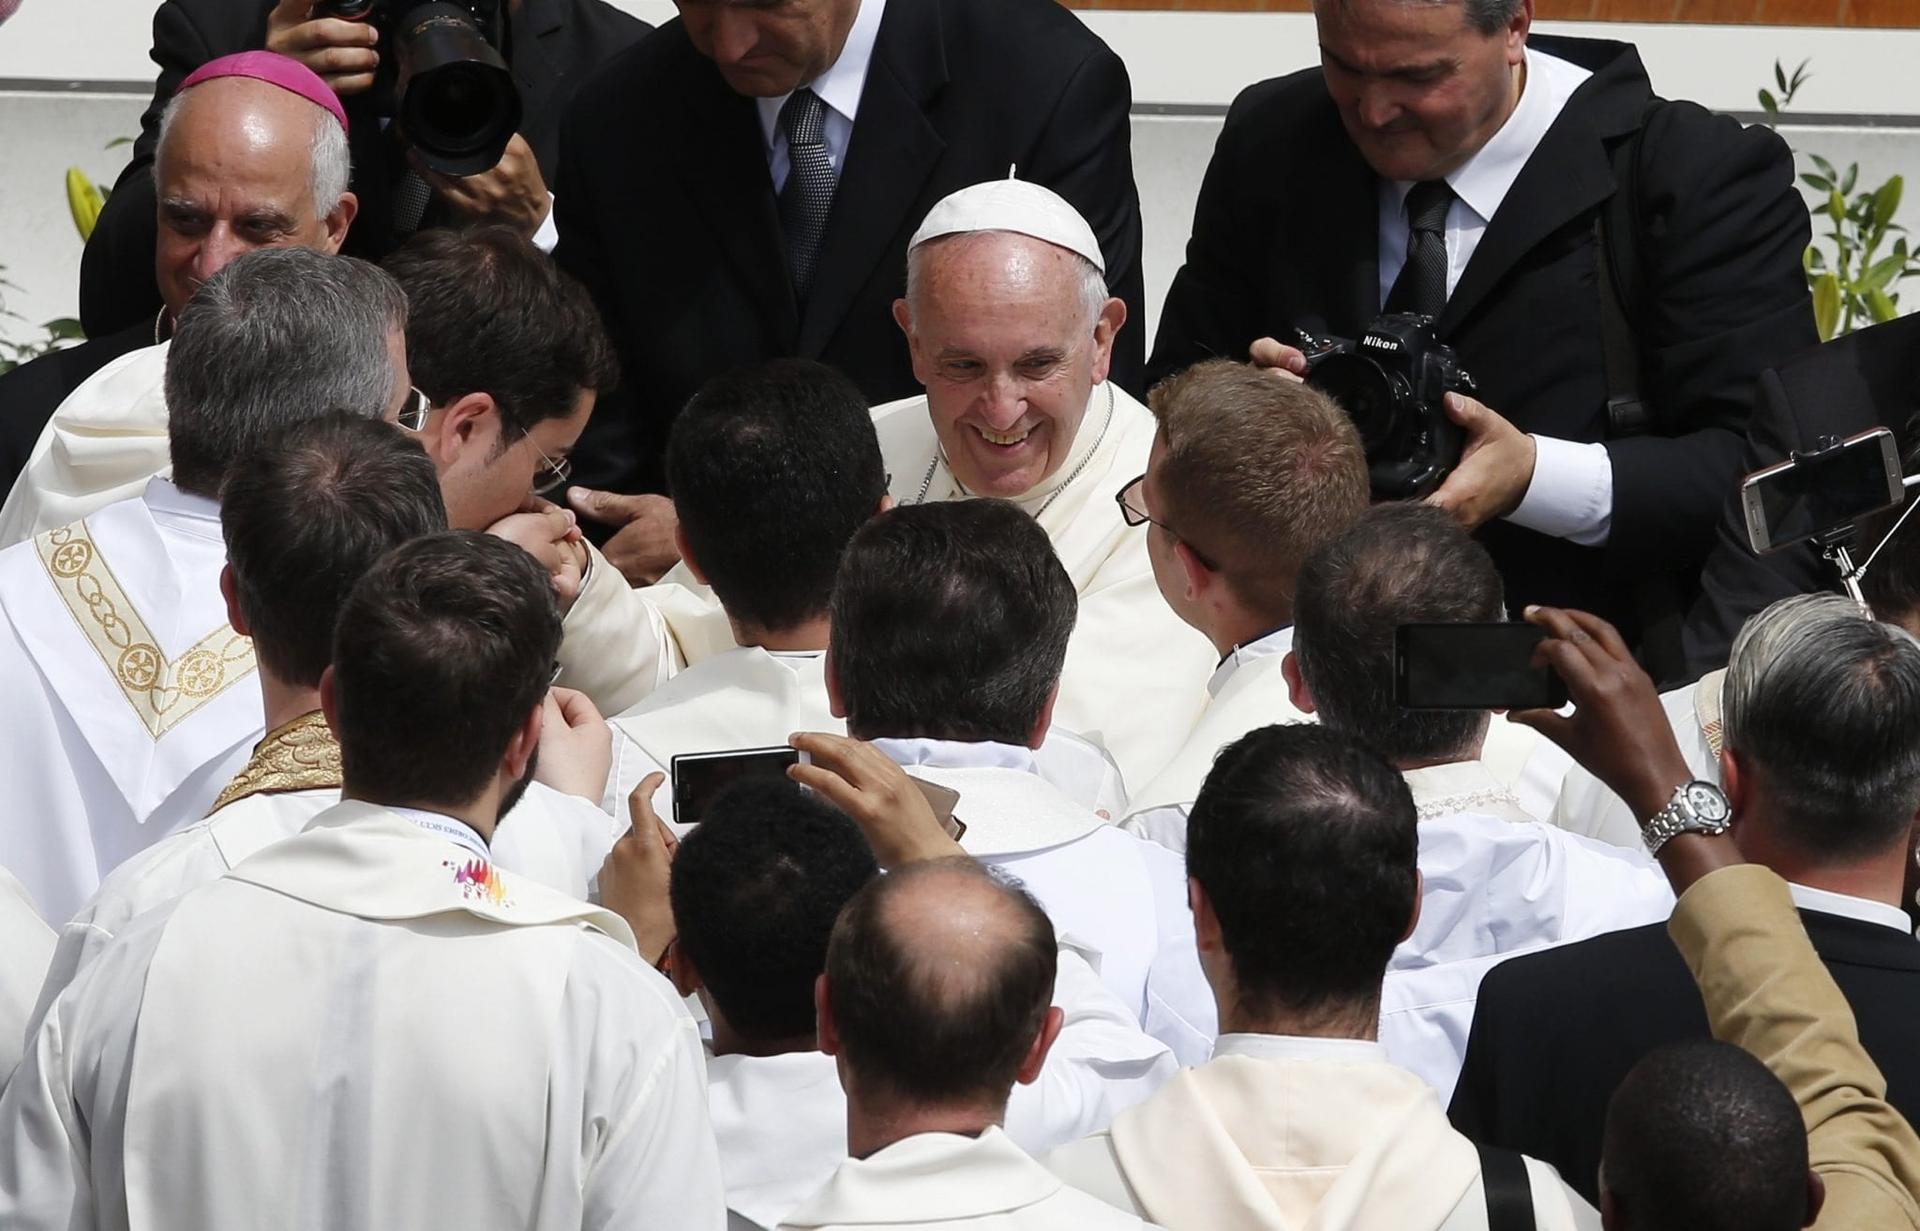 Pope: Good priests don’t own gloves, they get their hands dirty